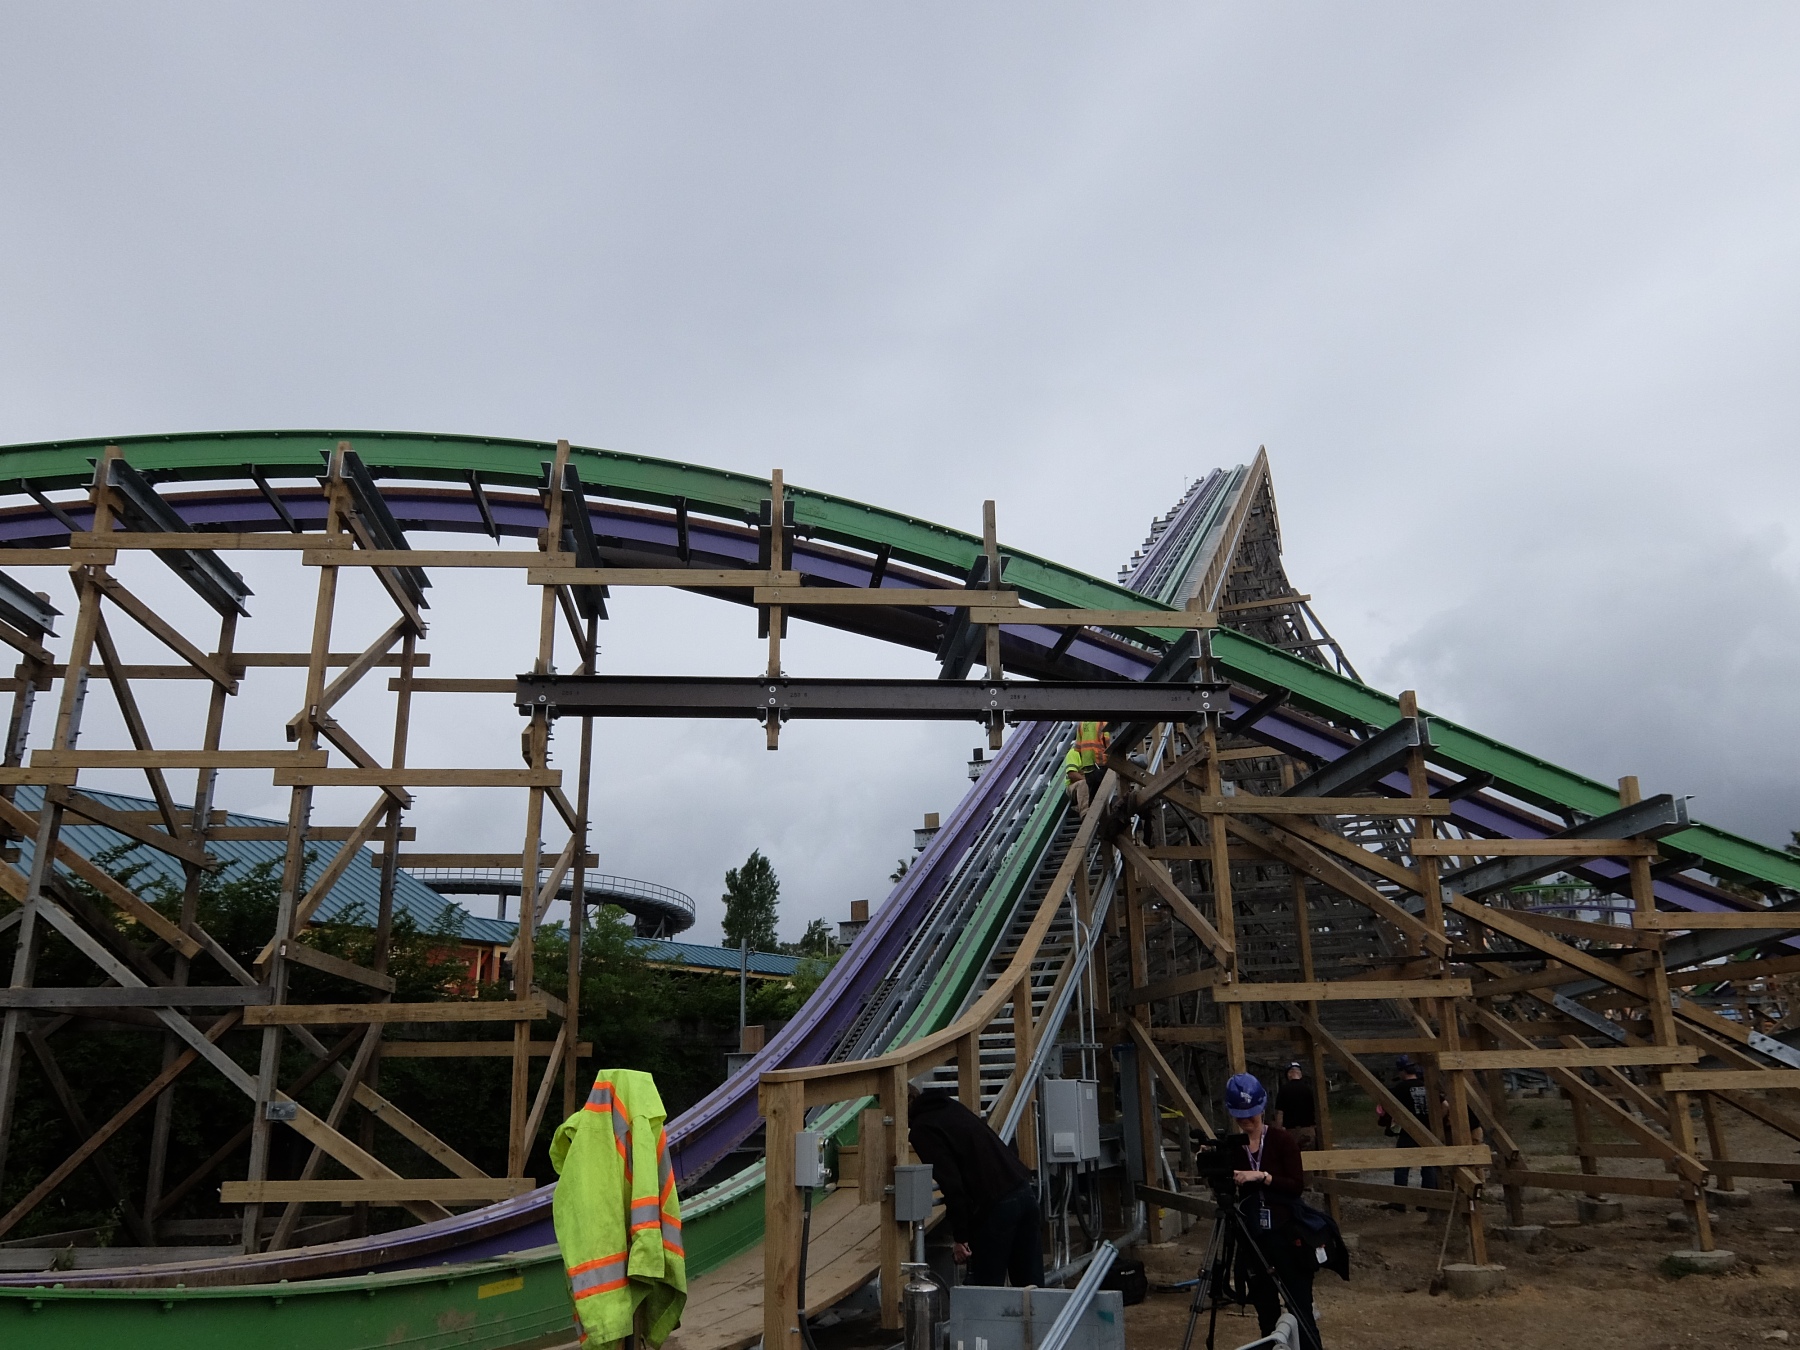 The breaking wave turn exits over the lift hill, creating a little headchopper for the riders going up the lift.